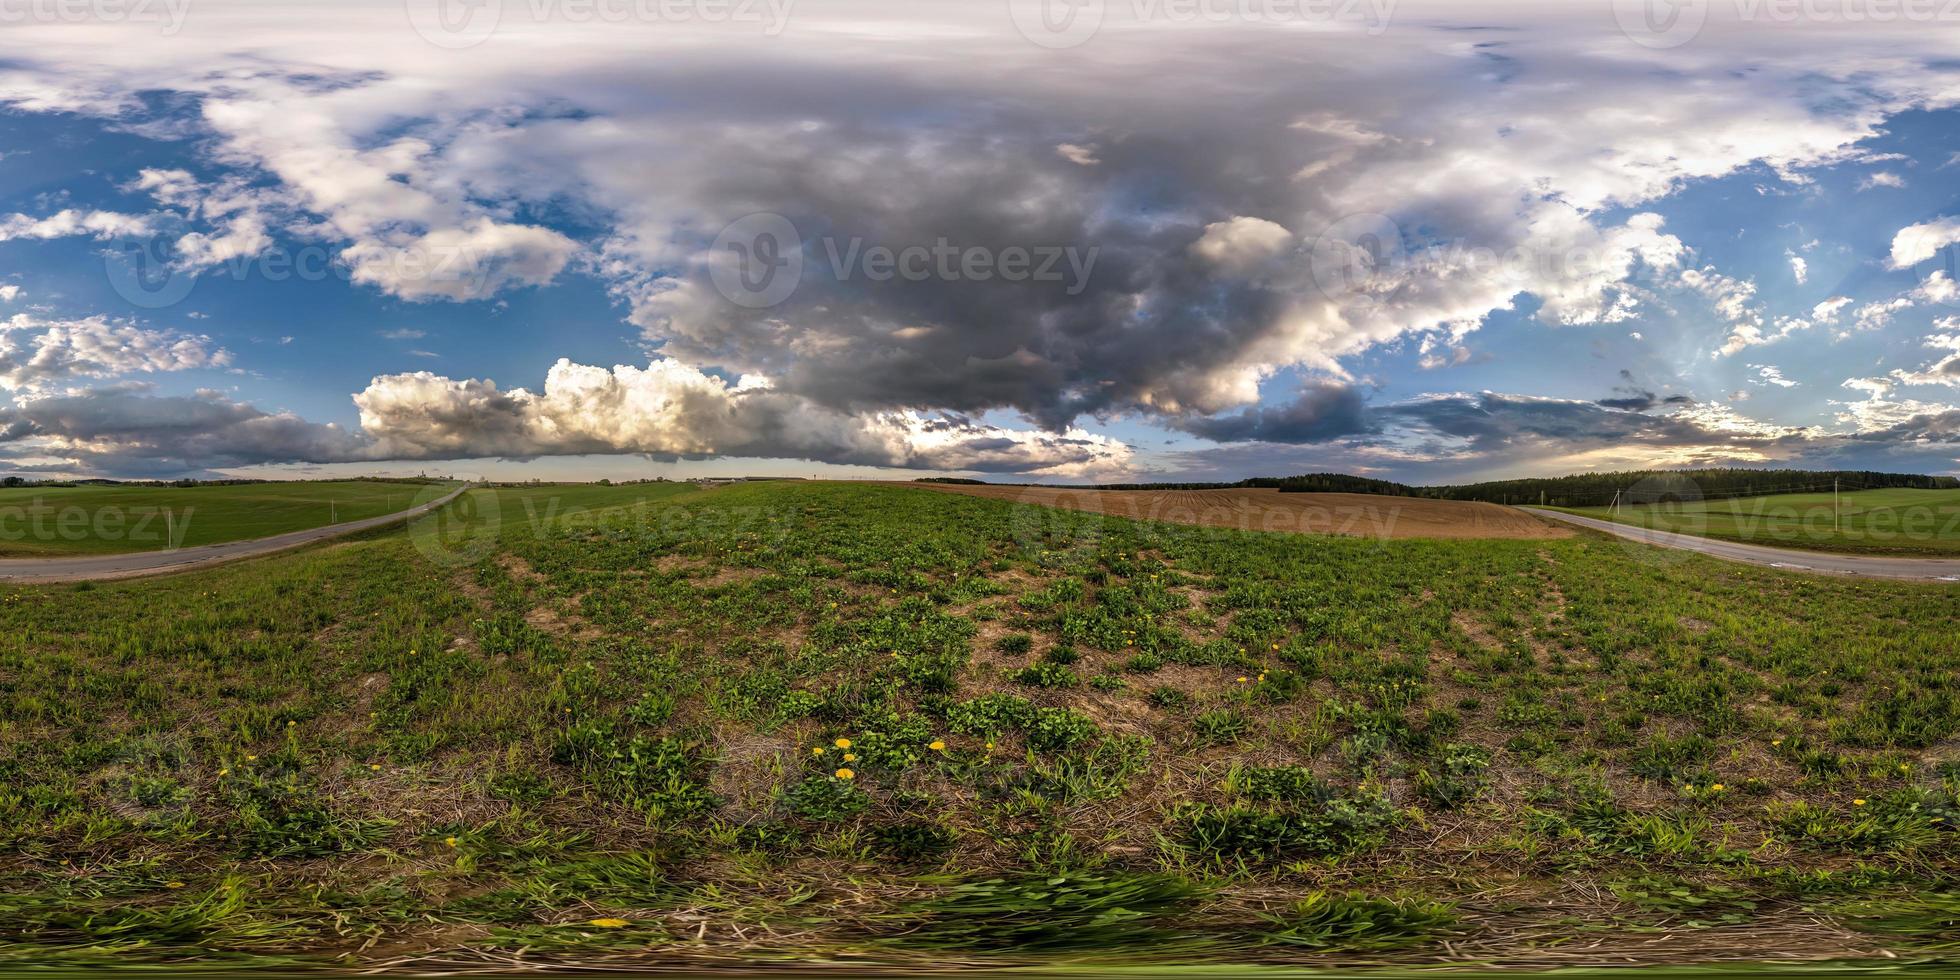 full seamless spherical hdri panorama 360 degrees angle view on among fields in spring evening with awesome clouds before storm in equirectangular projection, ready for VR AR virtual reality content photo